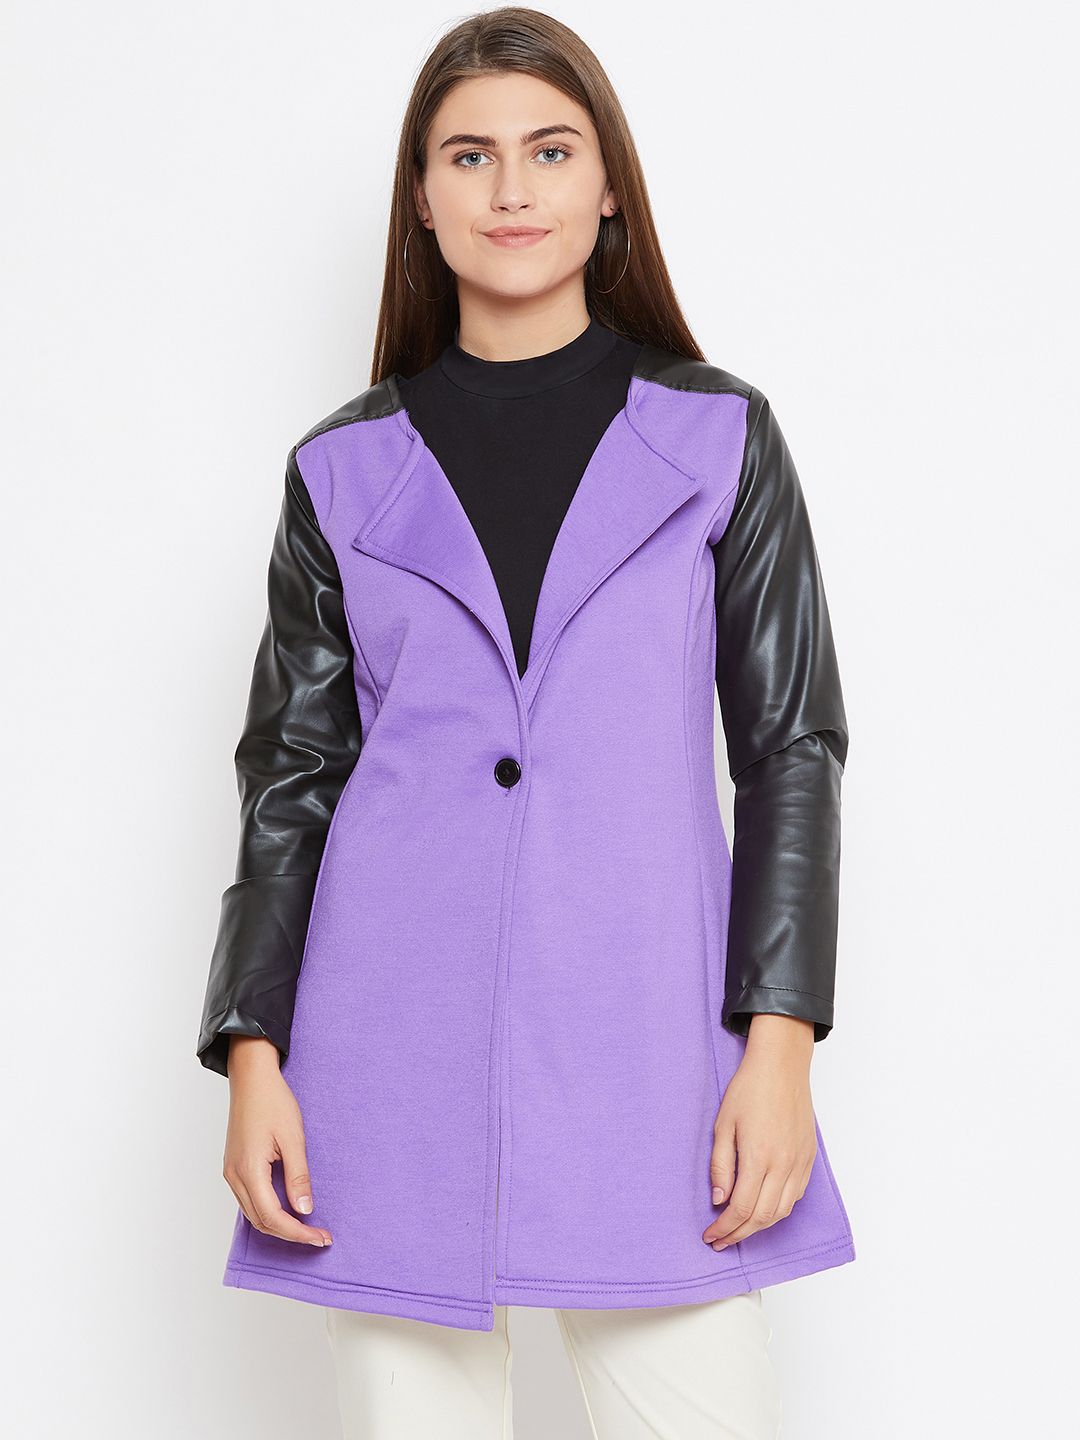 Belle Fille Women Purple Solid Tailored Jacket Price in India